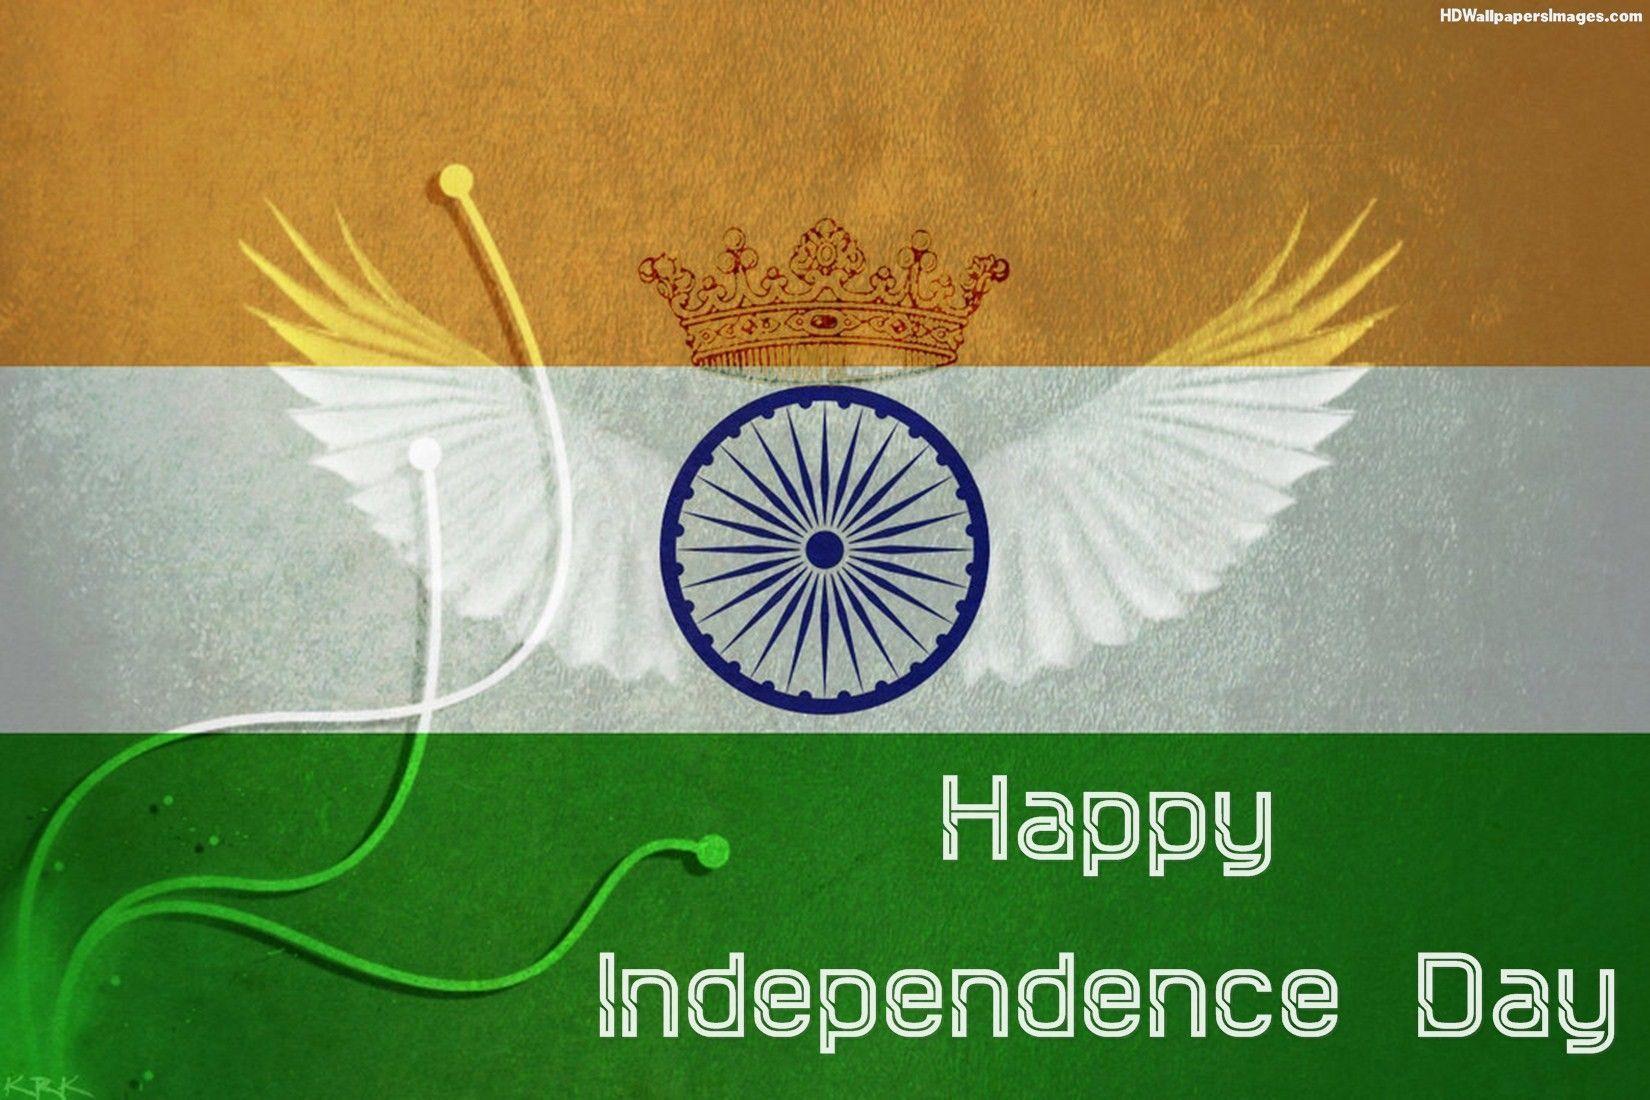 Happy Independence Day 2015 Image. HD Wallpaper Image